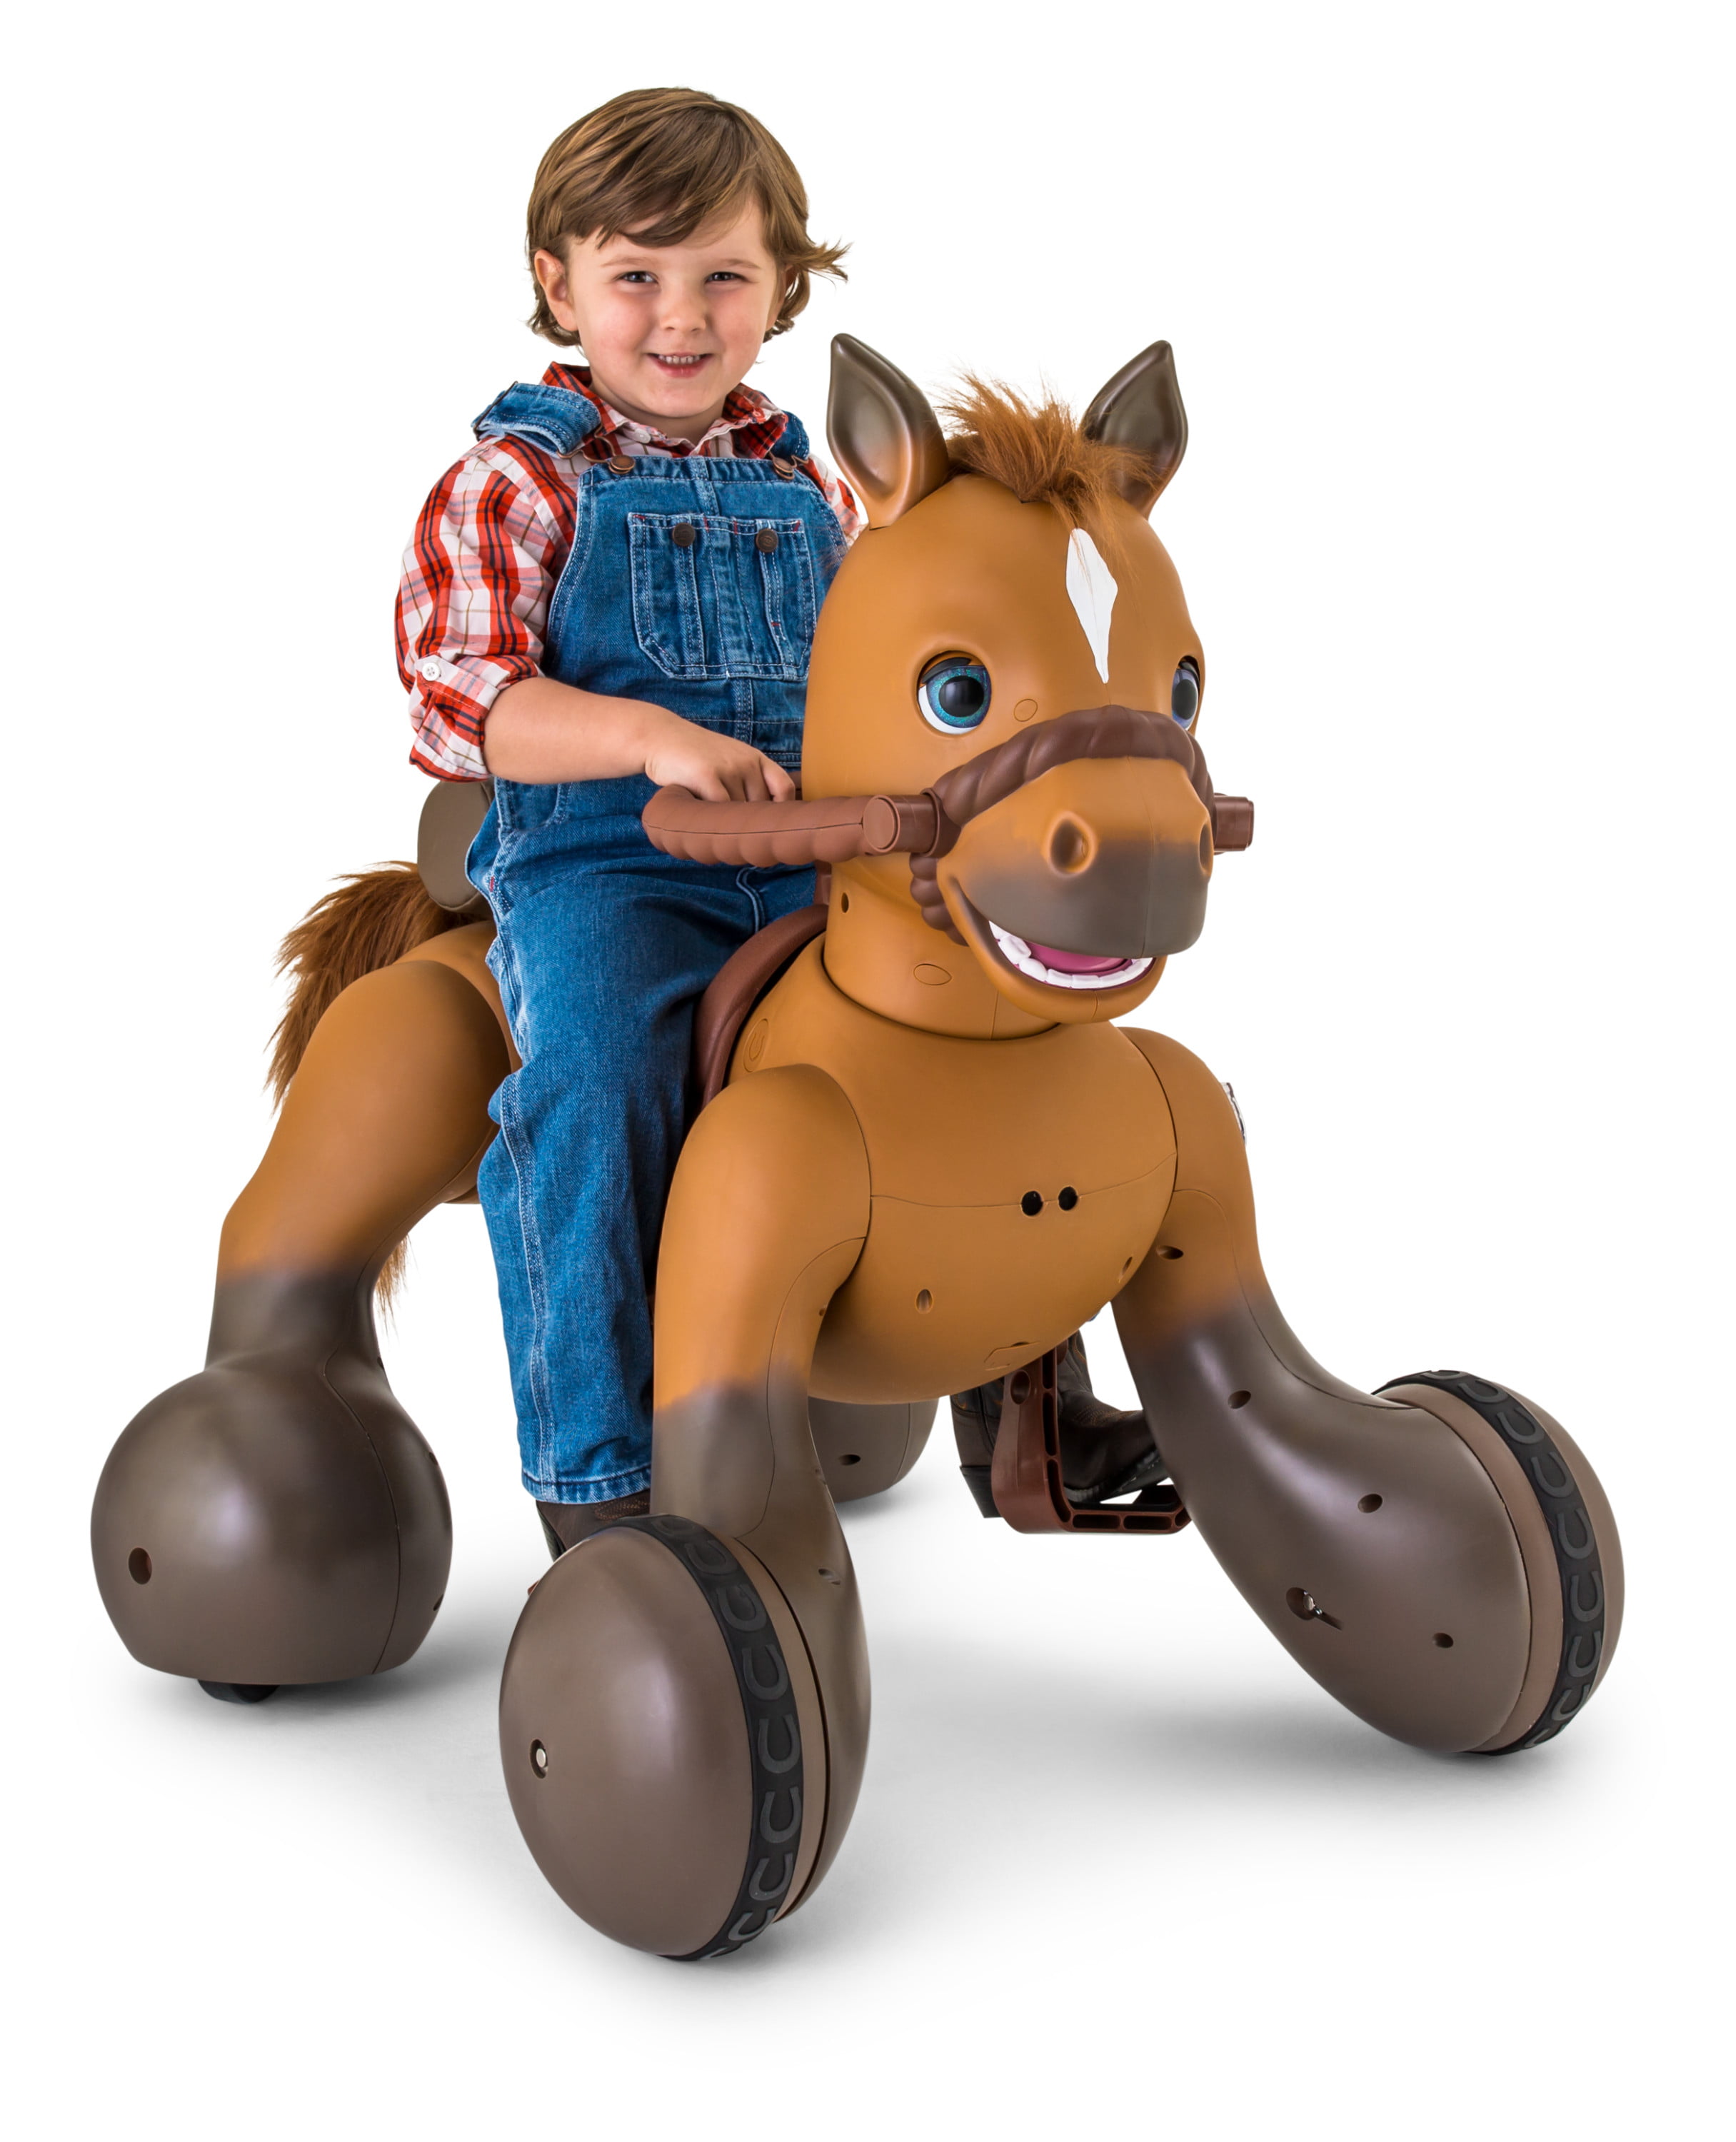 New 12-Volt Rideamals Scout Pony Kids Interactive Ride-On Toy by Kid Trax Car 